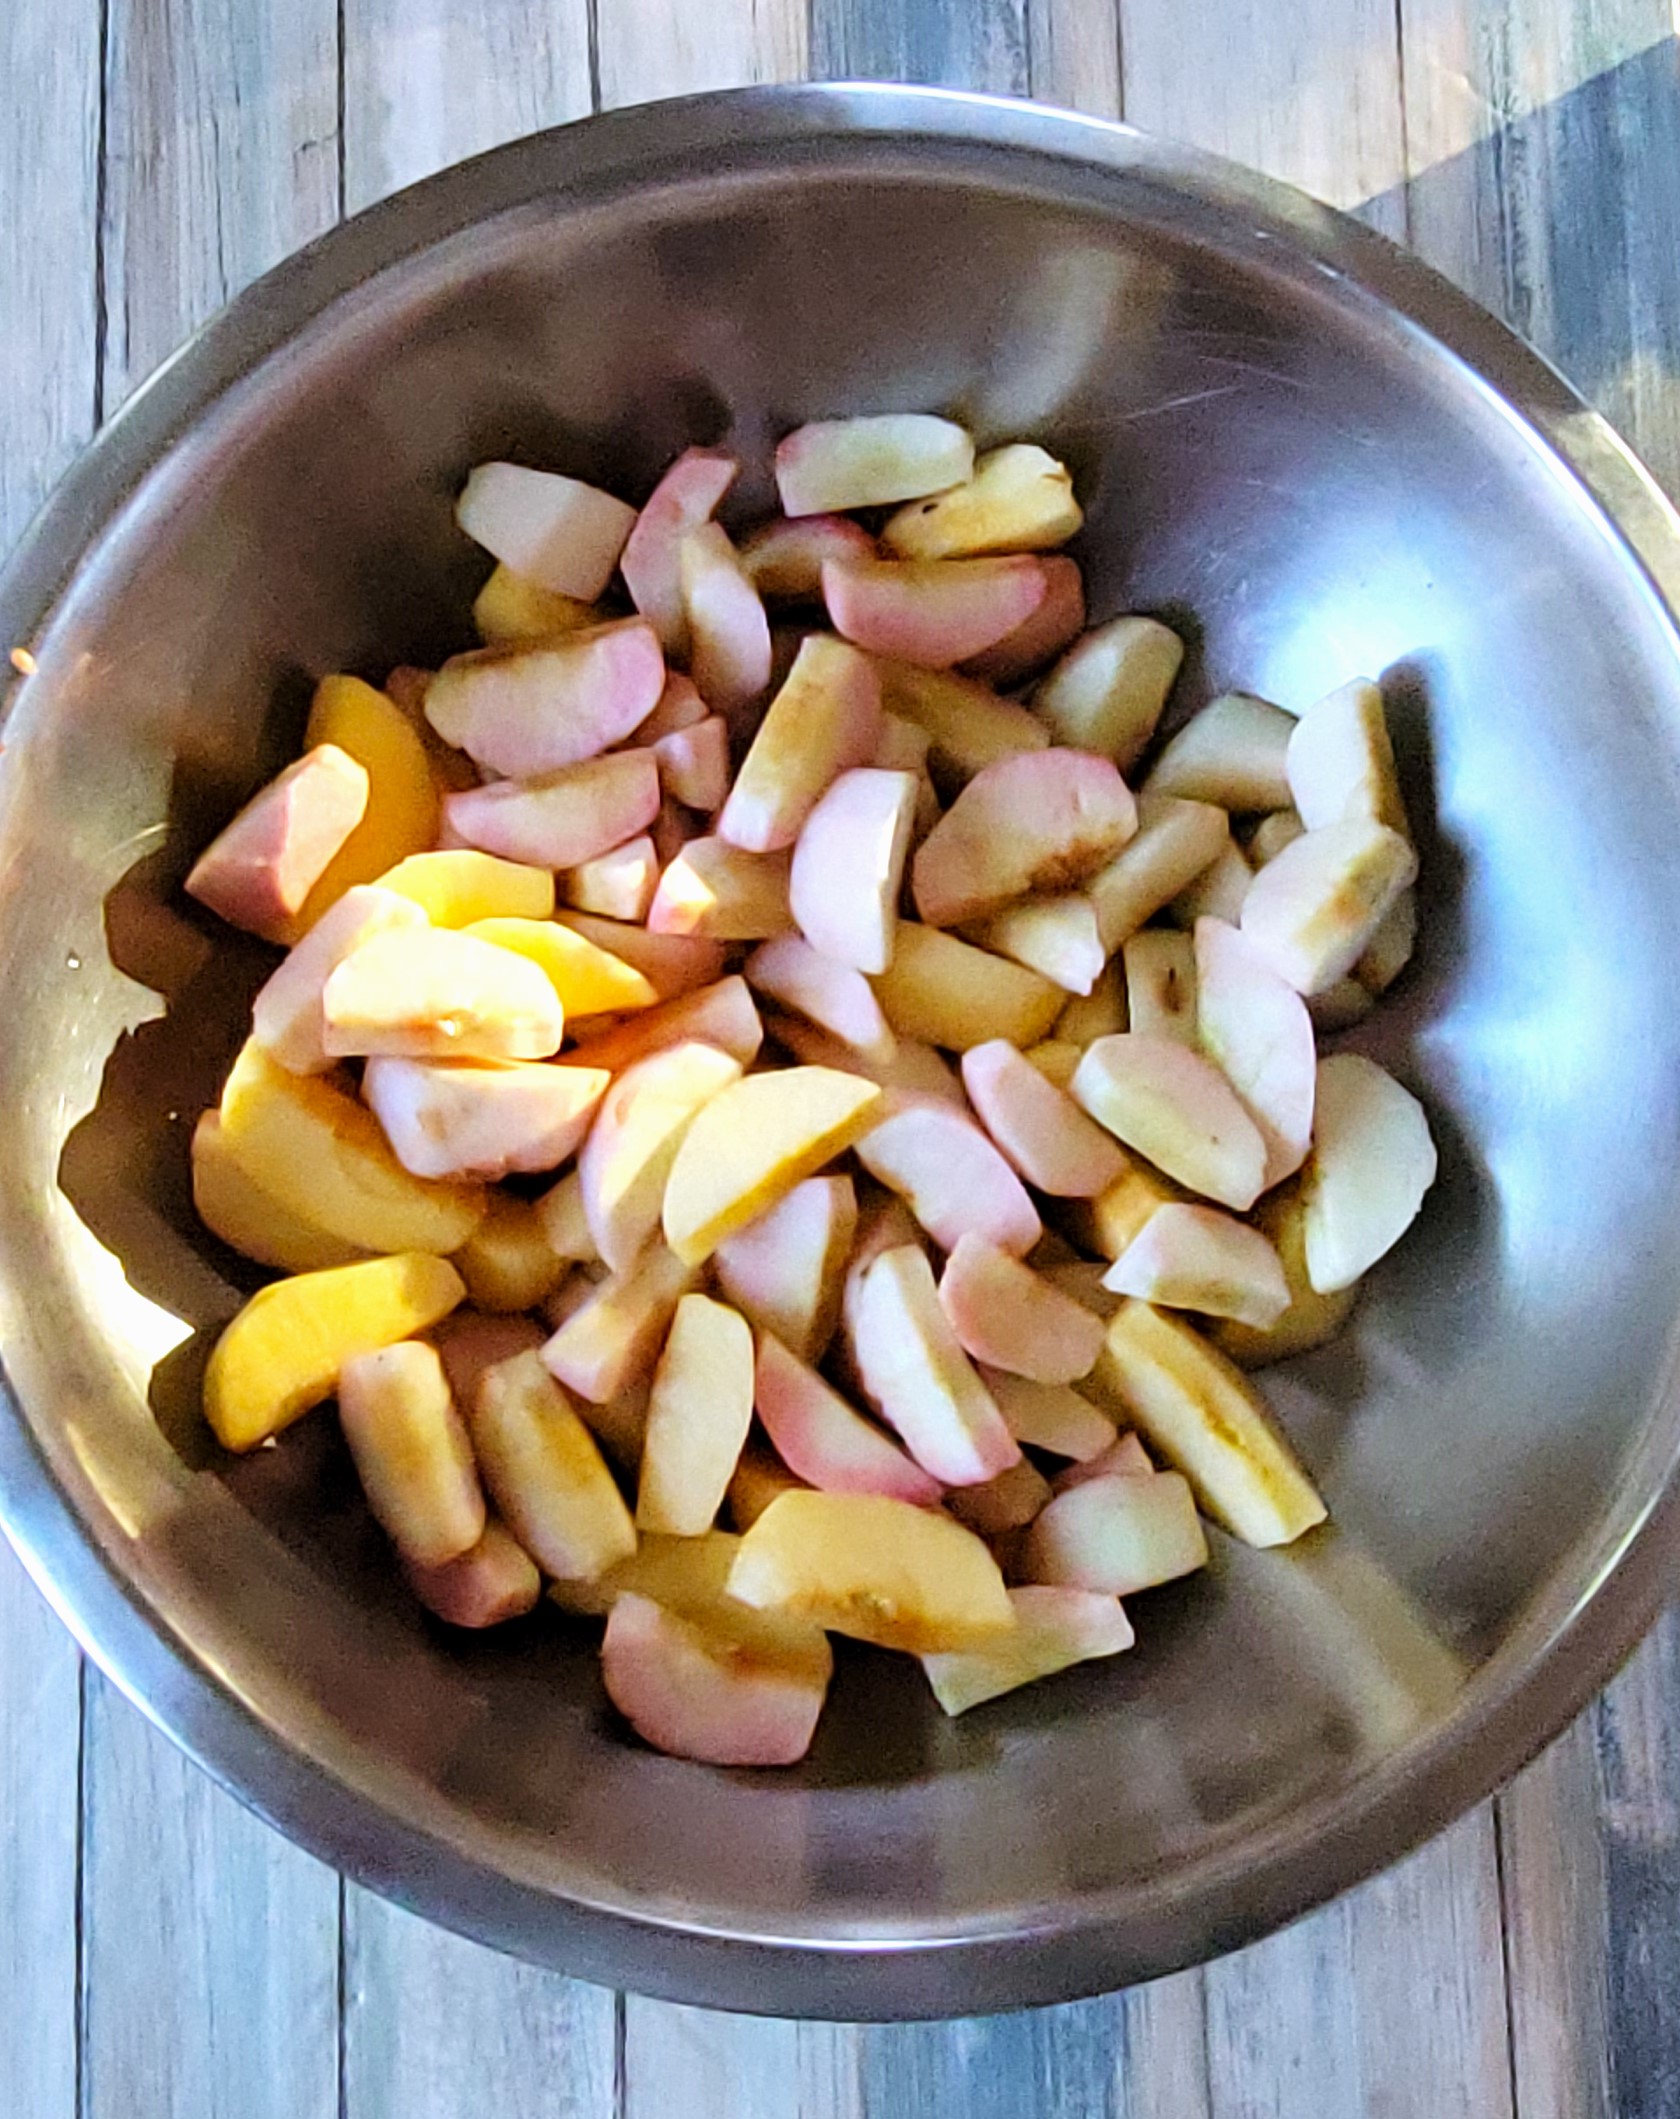 Perfectly peeled and sliced apples.